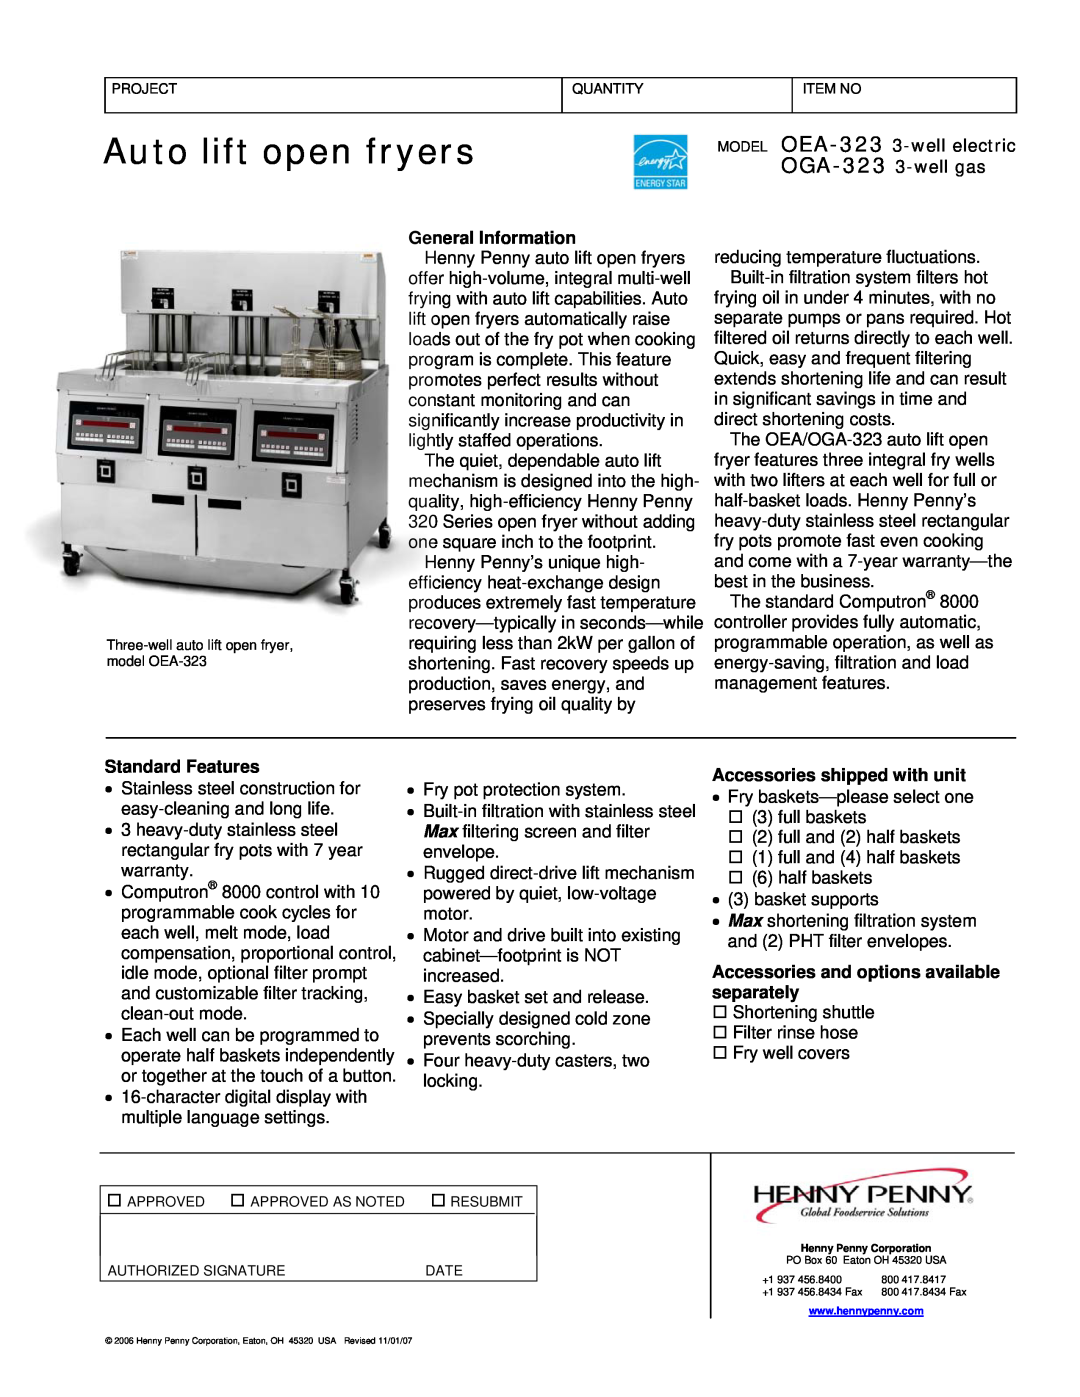 Henny Penny OGA-323 warranty Auto lift open fryers, General Information, Standard Features, Accessories shipped with unit 